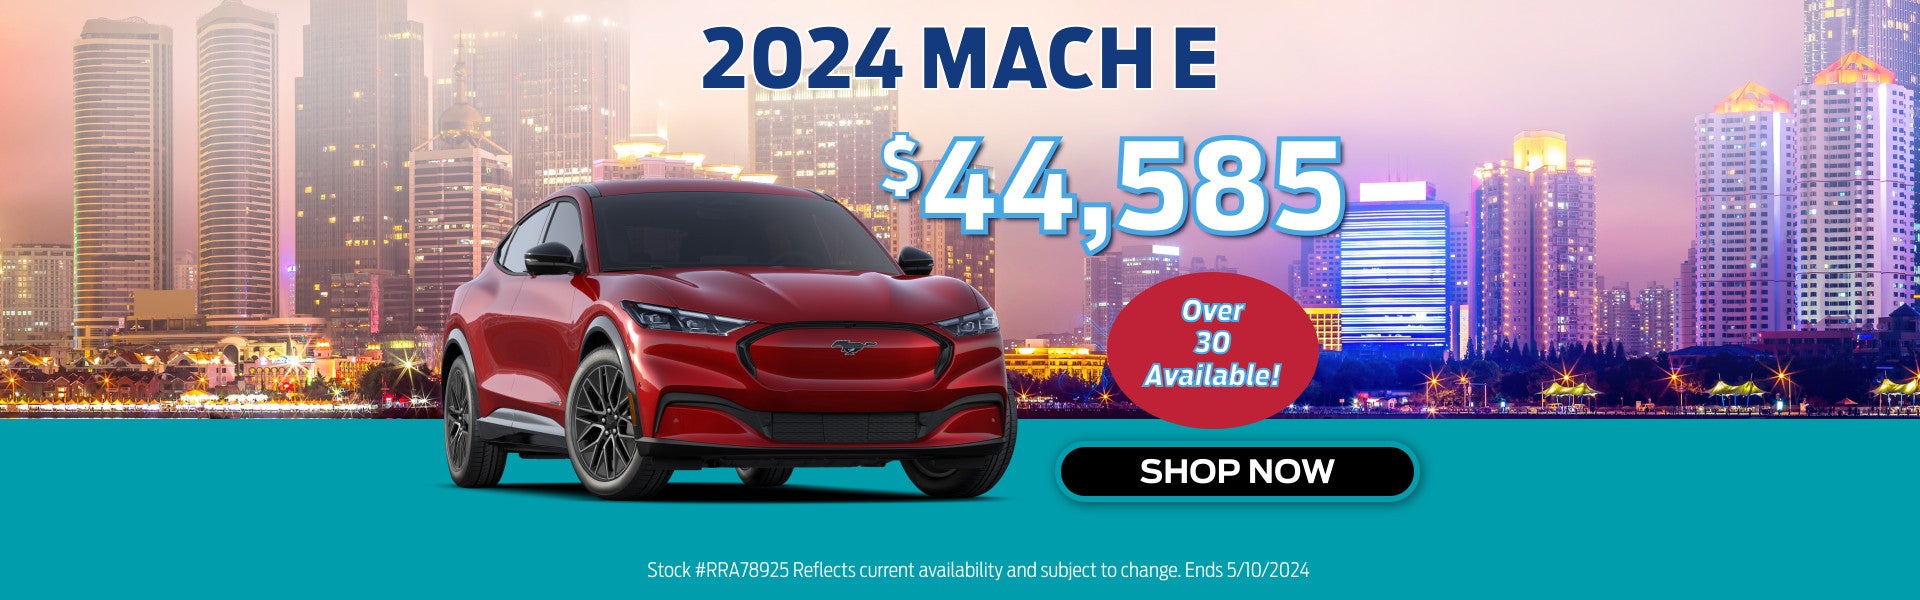 2024 Mach-E, $44,585, Over 30 available!